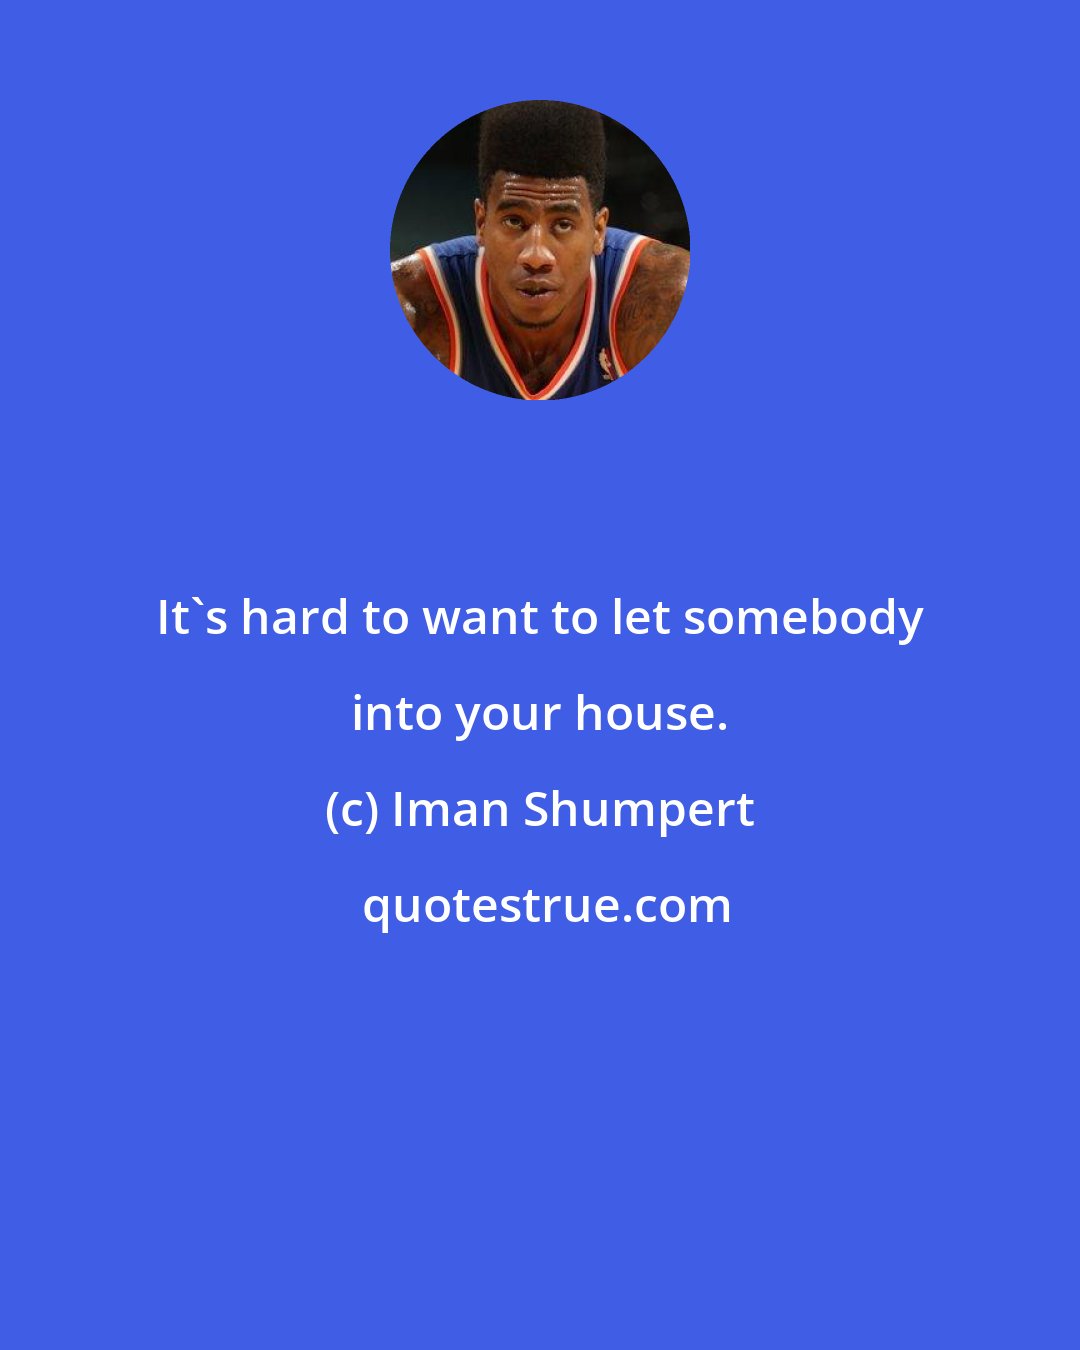 Iman Shumpert: It's hard to want to let somebody into your house.